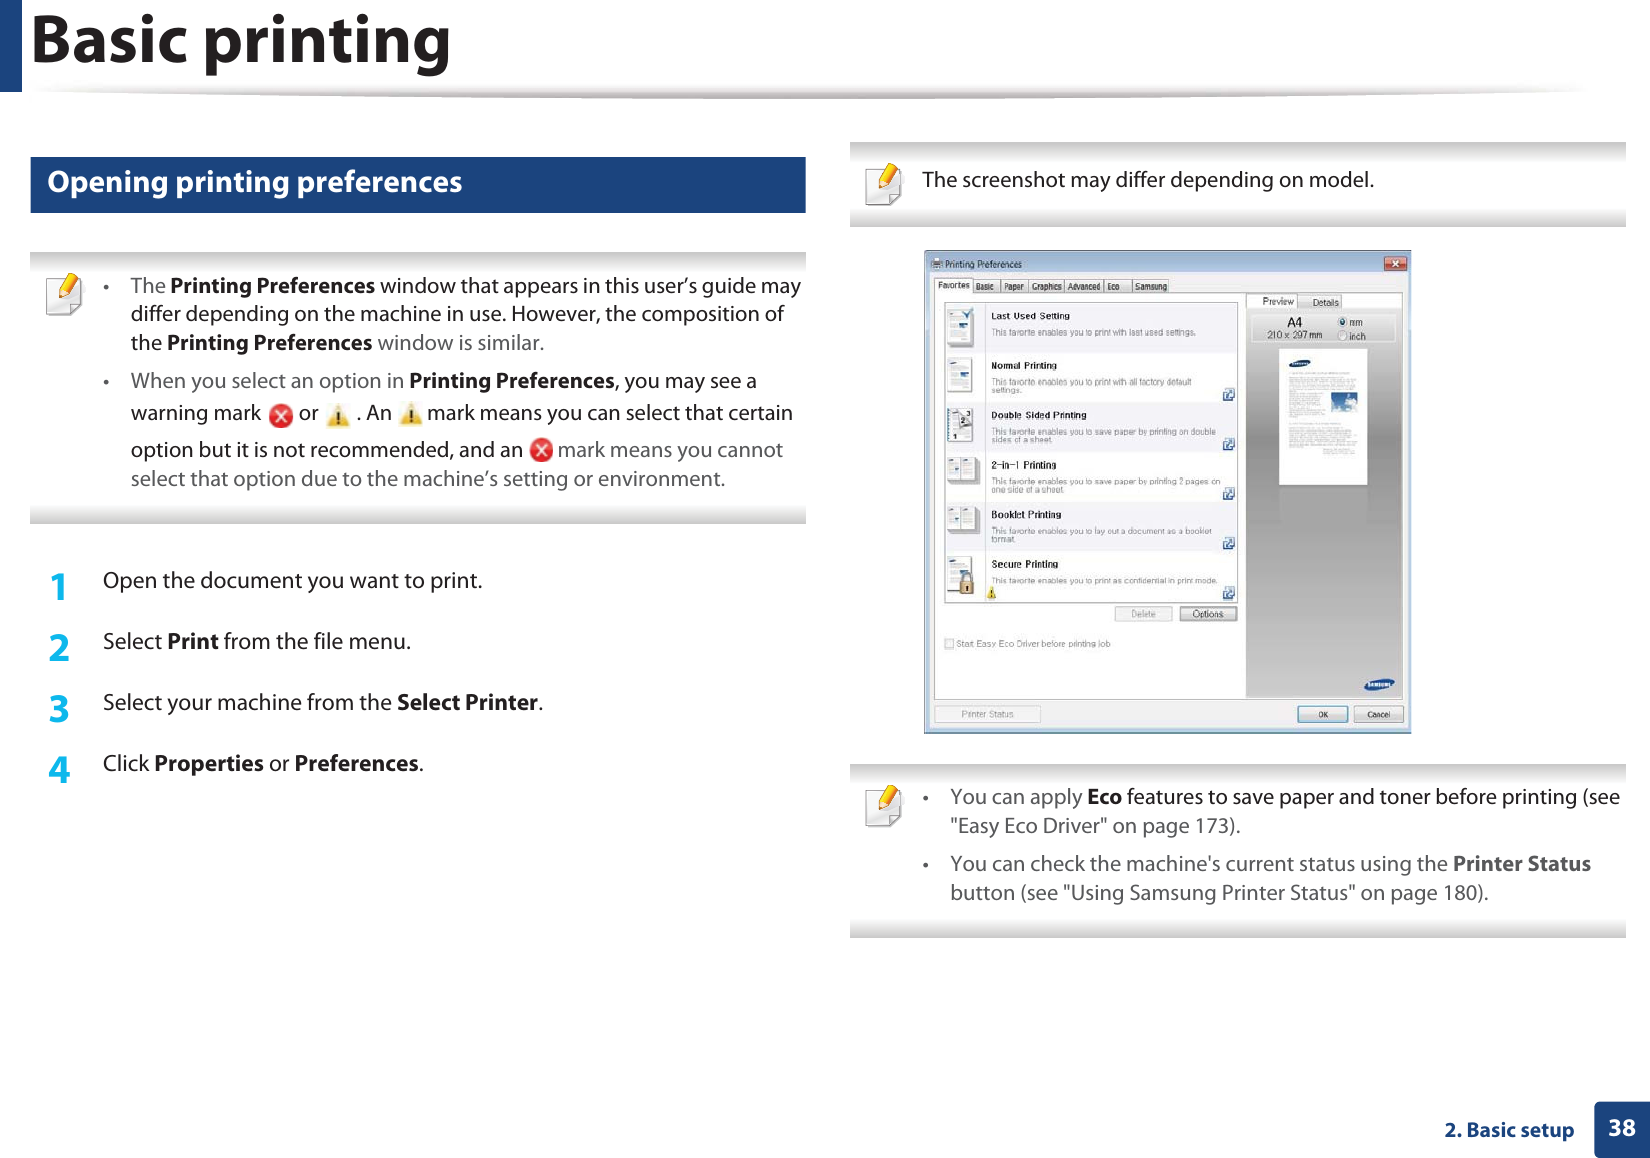 Basic printing382. Basic setup9 Opening printing preferences • The Printing Preferences window that appears in this user’s guide may differ depending on the machine in use. However, the composition of the Printing Preferences window is similar.• When you select an option in Printing Preferences, you may see a warning mark   or   . An   mark means you can select that certain option but it is not recommended, and an   mark means you cannot select that option due to the machine’s setting or environment. 1Open the document you want to print.2  Select Print from the file menu.3  Select your machine from the Select Printer. 4  Click Properties or Preferences.  The screenshot may differ depending on model.  • You can apply Eco features to save paper and toner before printing (see &quot;Easy Eco Driver&quot; on page 173).• You can check the machine&apos;s current status using the Printer Status button (see &quot;Using Samsung Printer Status&quot; on page 180). 